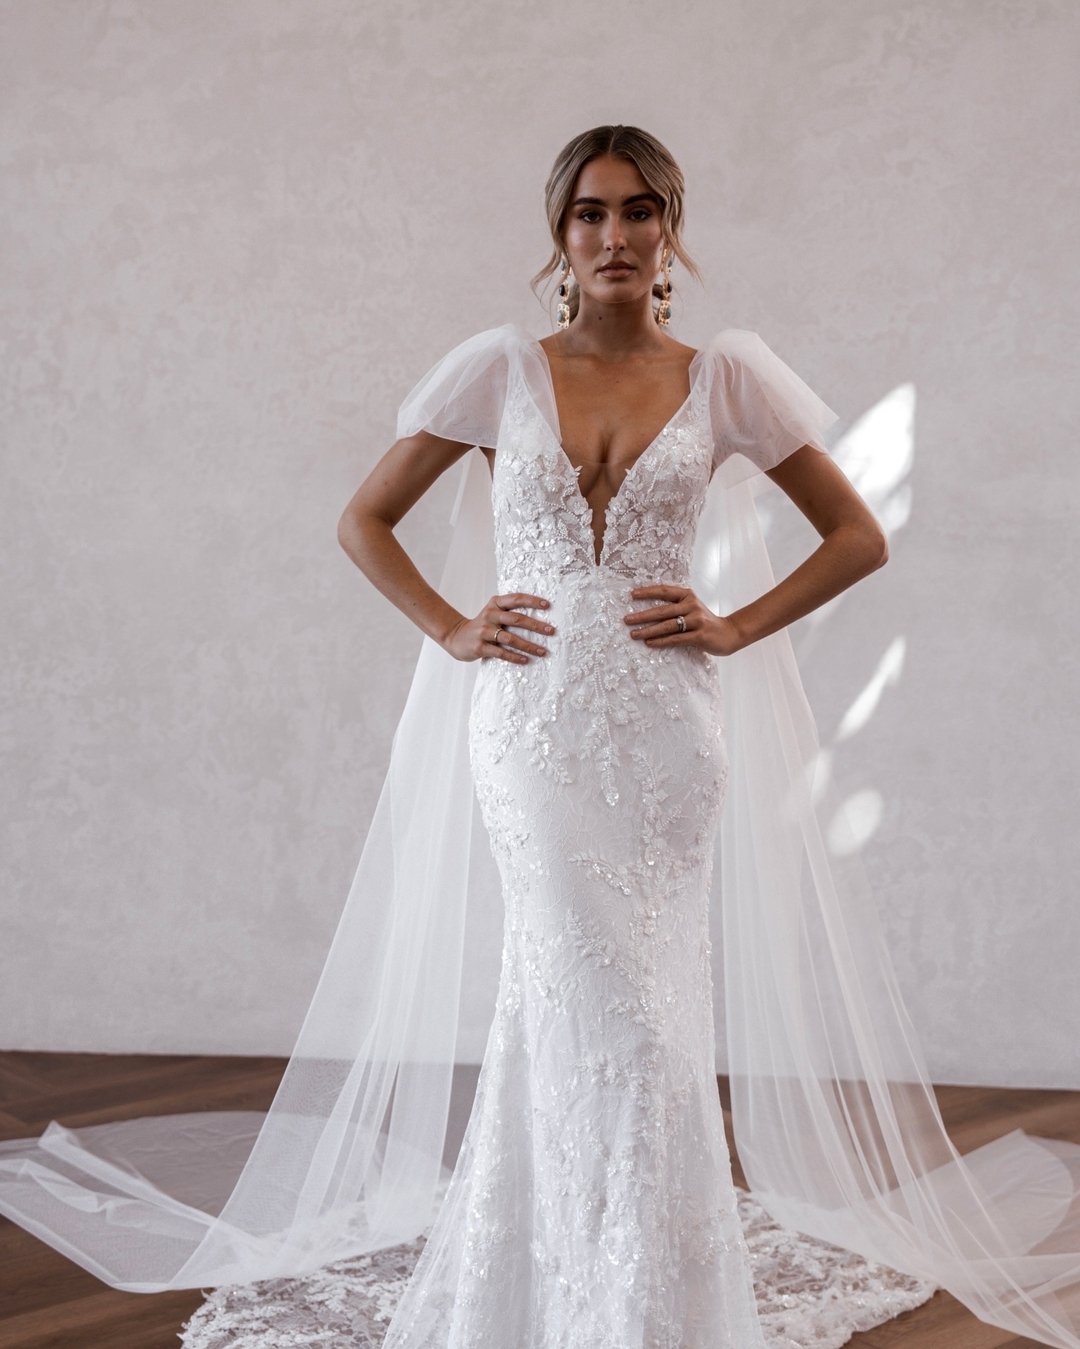 Calling all brides-to-be! If your wedding is November 2024 or sooner, it&rsquo;s time to say yes to your dress! 🤍​​​​​​​​
​​​​​​​​
It&rsquo;s important to shop for your bridal gown 9-12 months before to ensure there&rsquo;s enough time for your gown